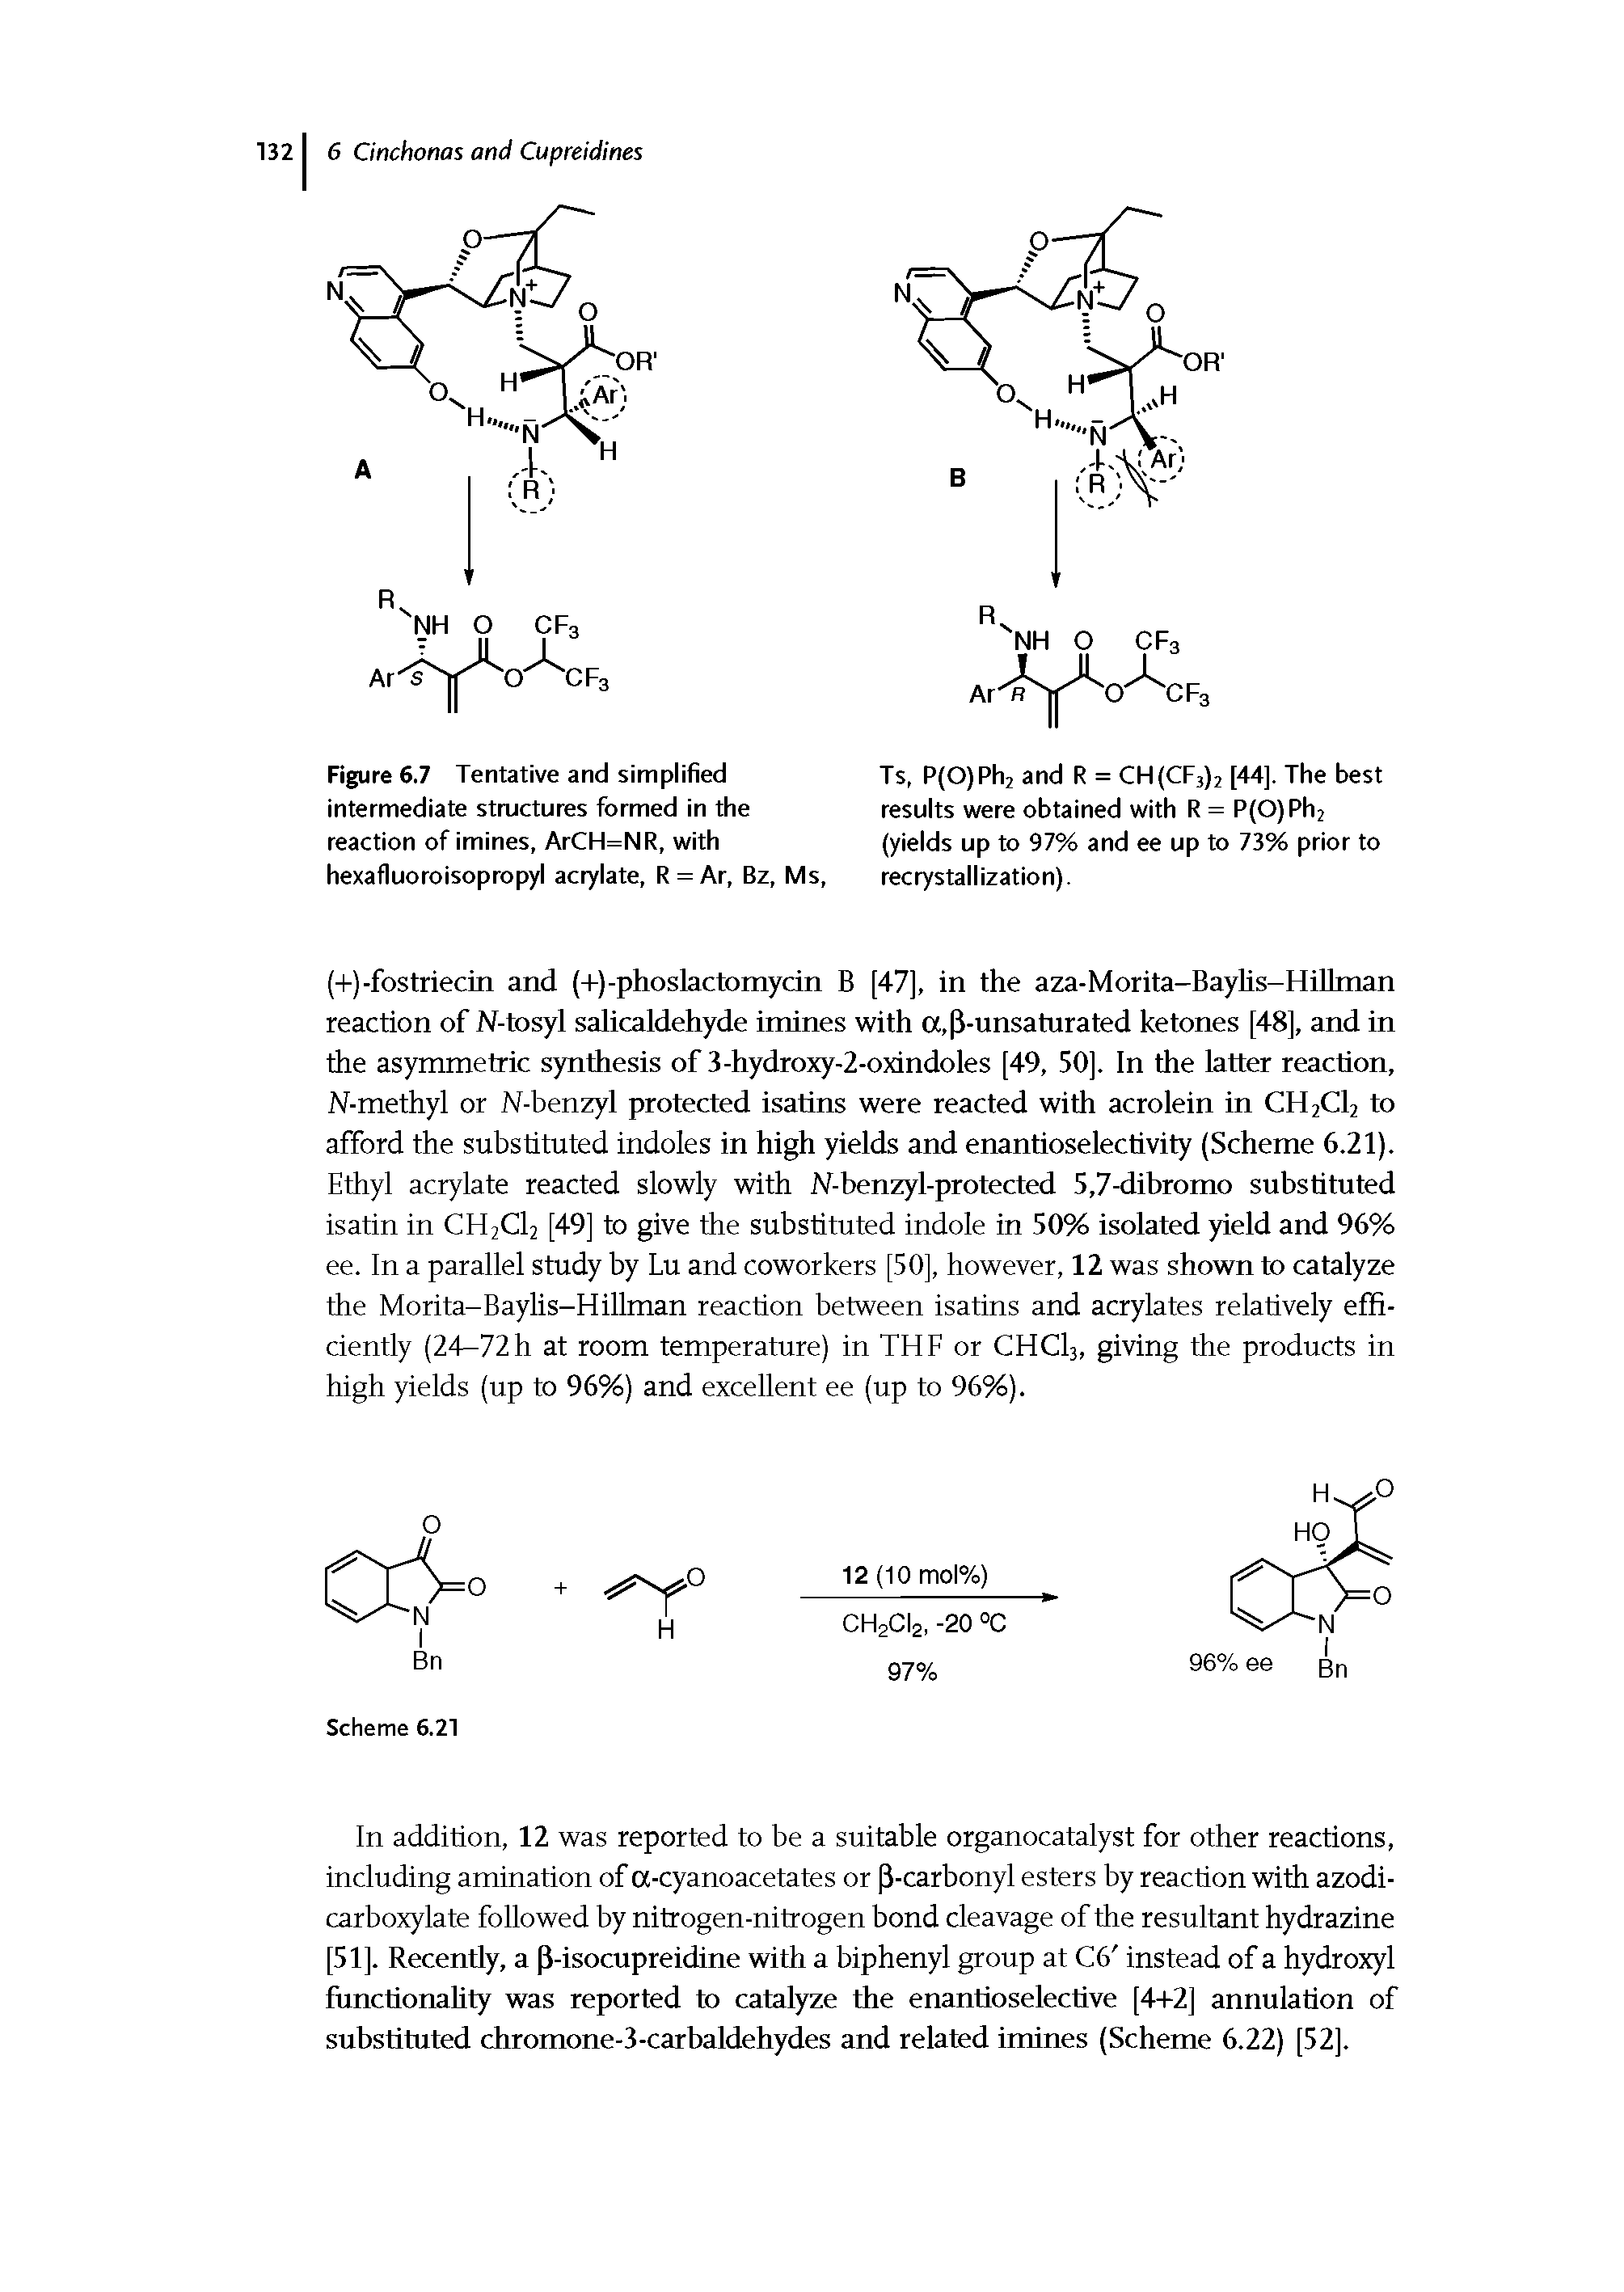 Figure 6.7 Tentative and simplified intermediate structures formed in the reaction of imines, ArCH=NR, with hexafluoroisopropyl acrylate, R = Ar, Bz, Ms,...